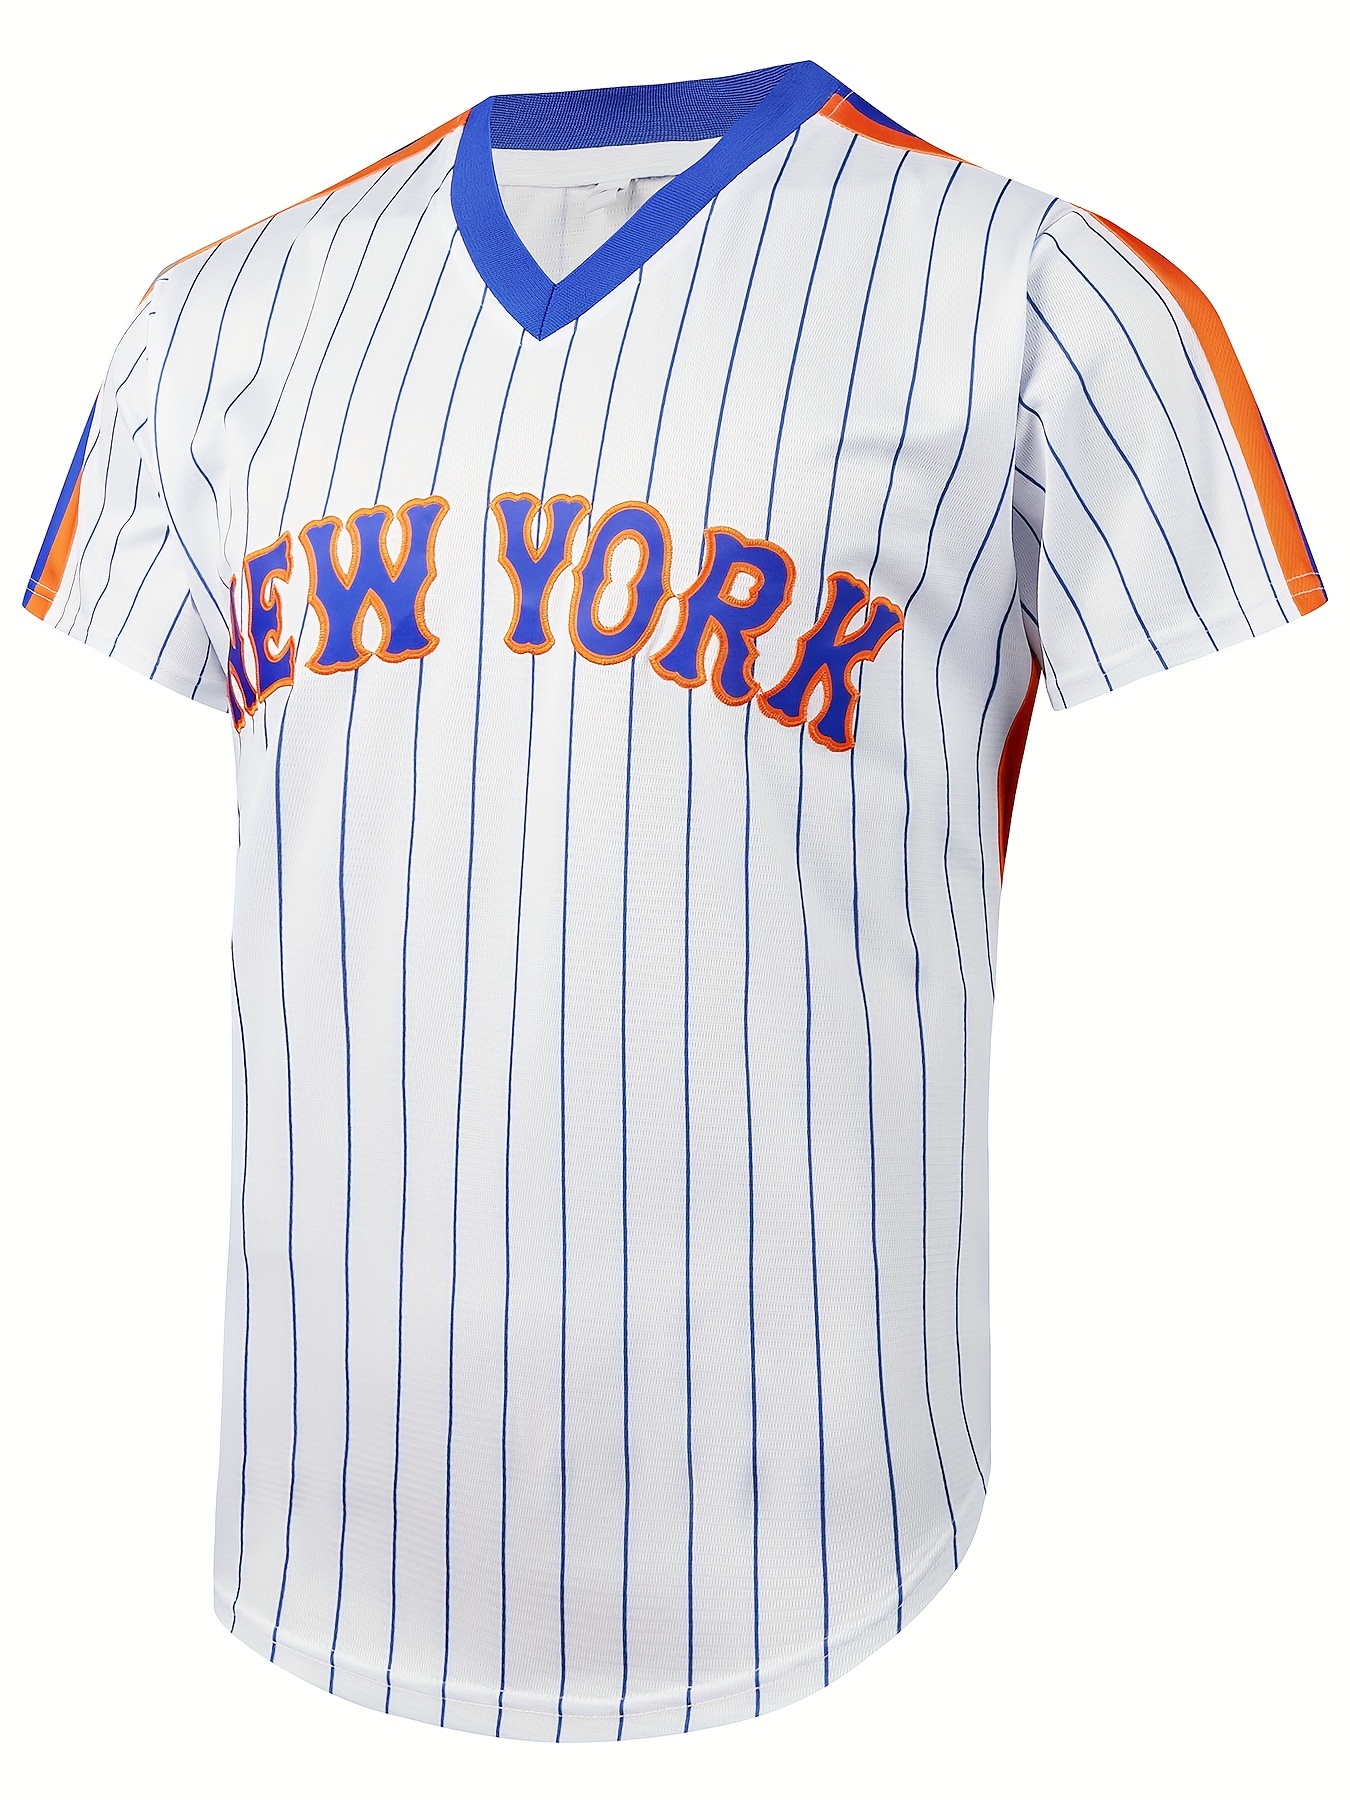 mets jersey button up